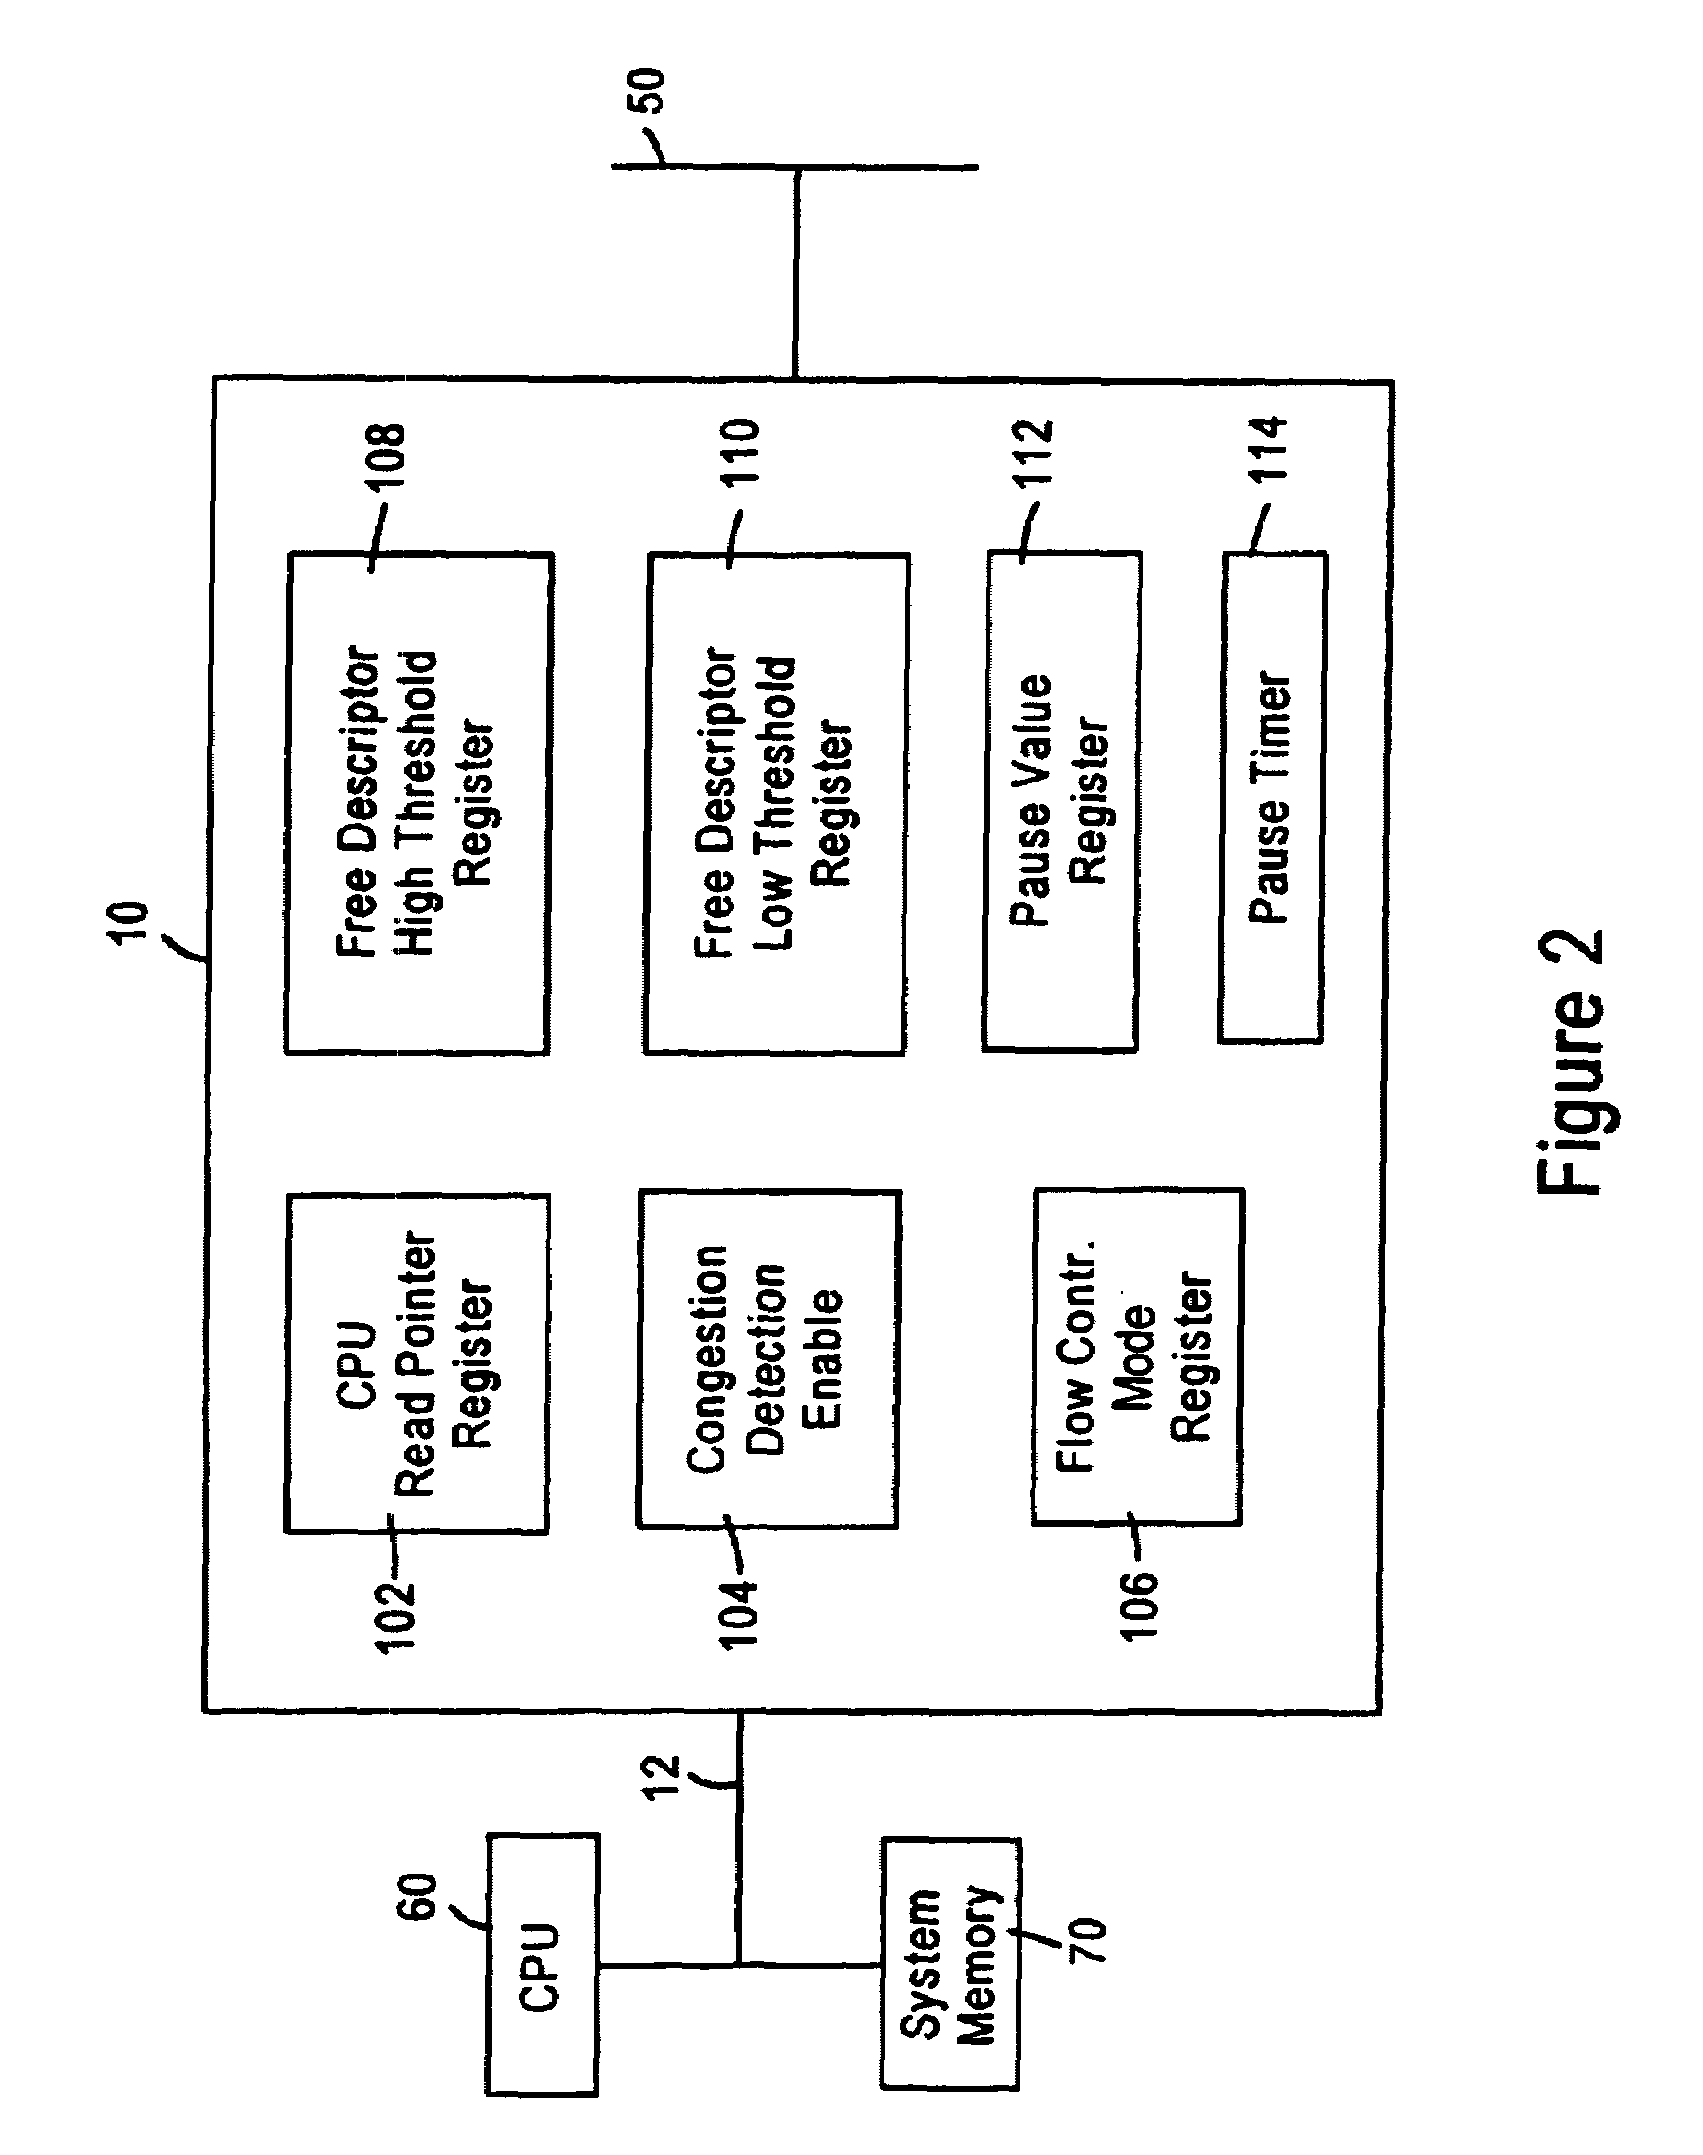 Automatic generation of flow control frames